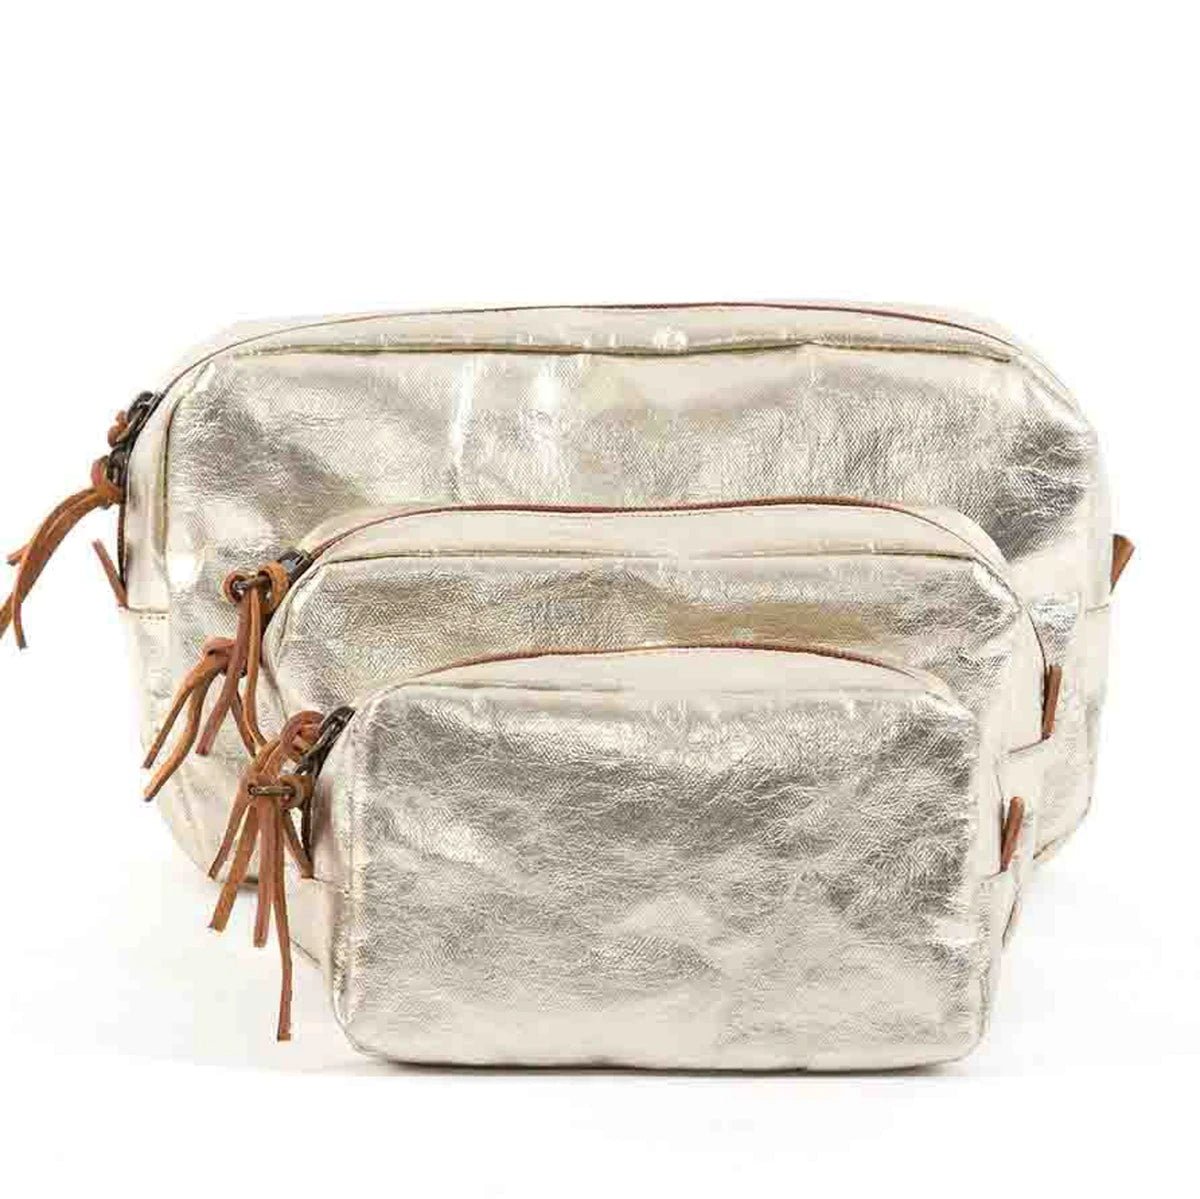 A set of three washable paper toiletry bags is shown. Each bag has a brown zip with a tan leather zip pull. The smallest bag is at the front, then the medium bag and the large size at the back. The bags shown are platinum metallic in colour.